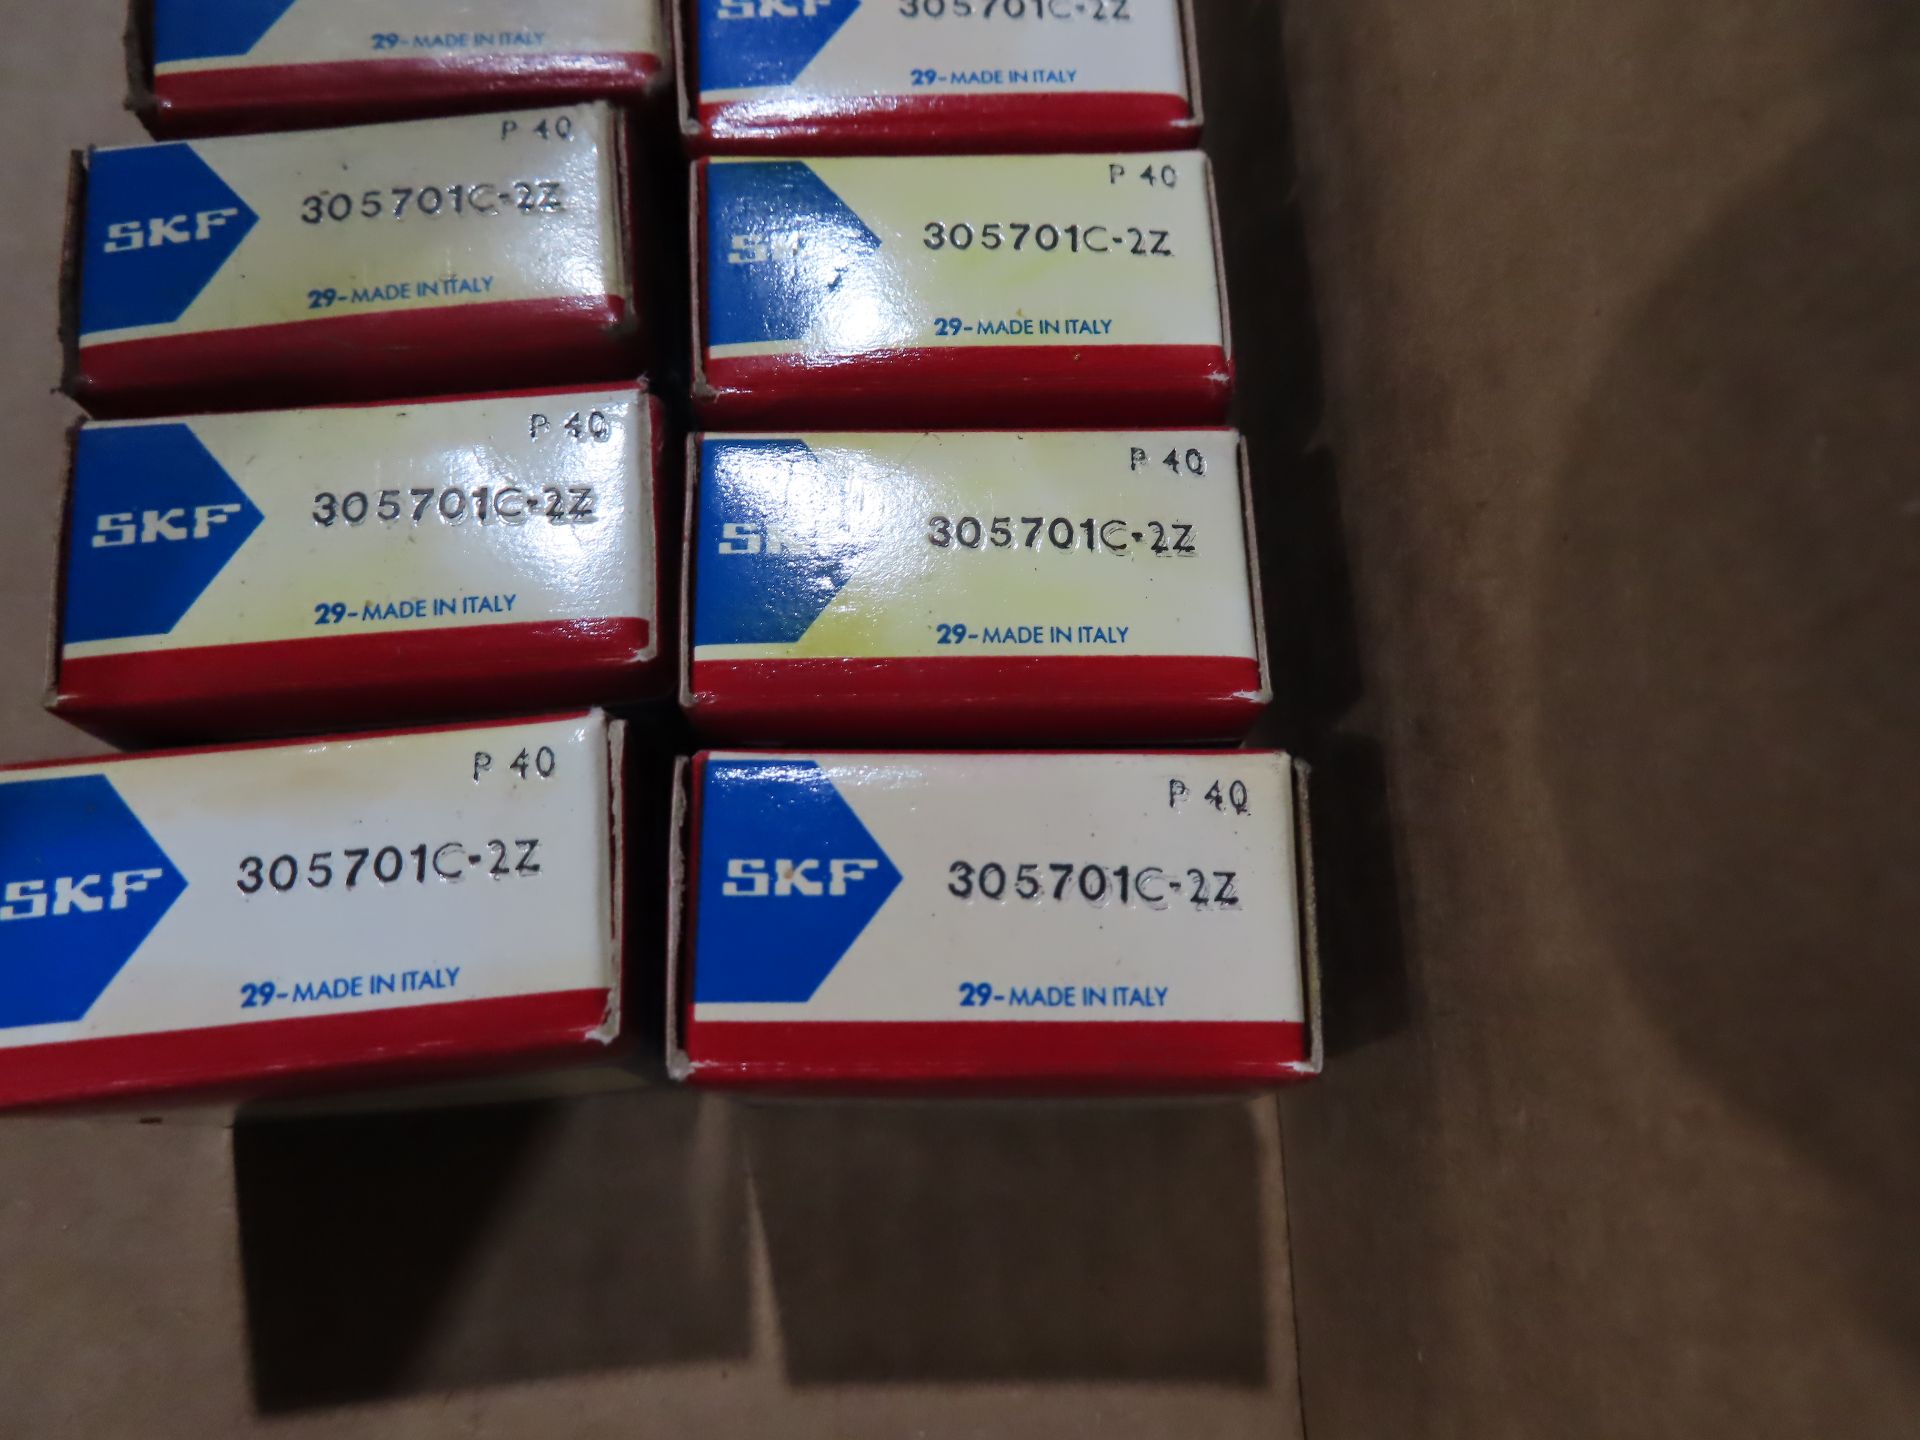 Qty 10 SKF model 305701C-2Z, new in box, as always with Brolyn LLC auctions, all lots can be - Image 2 of 2